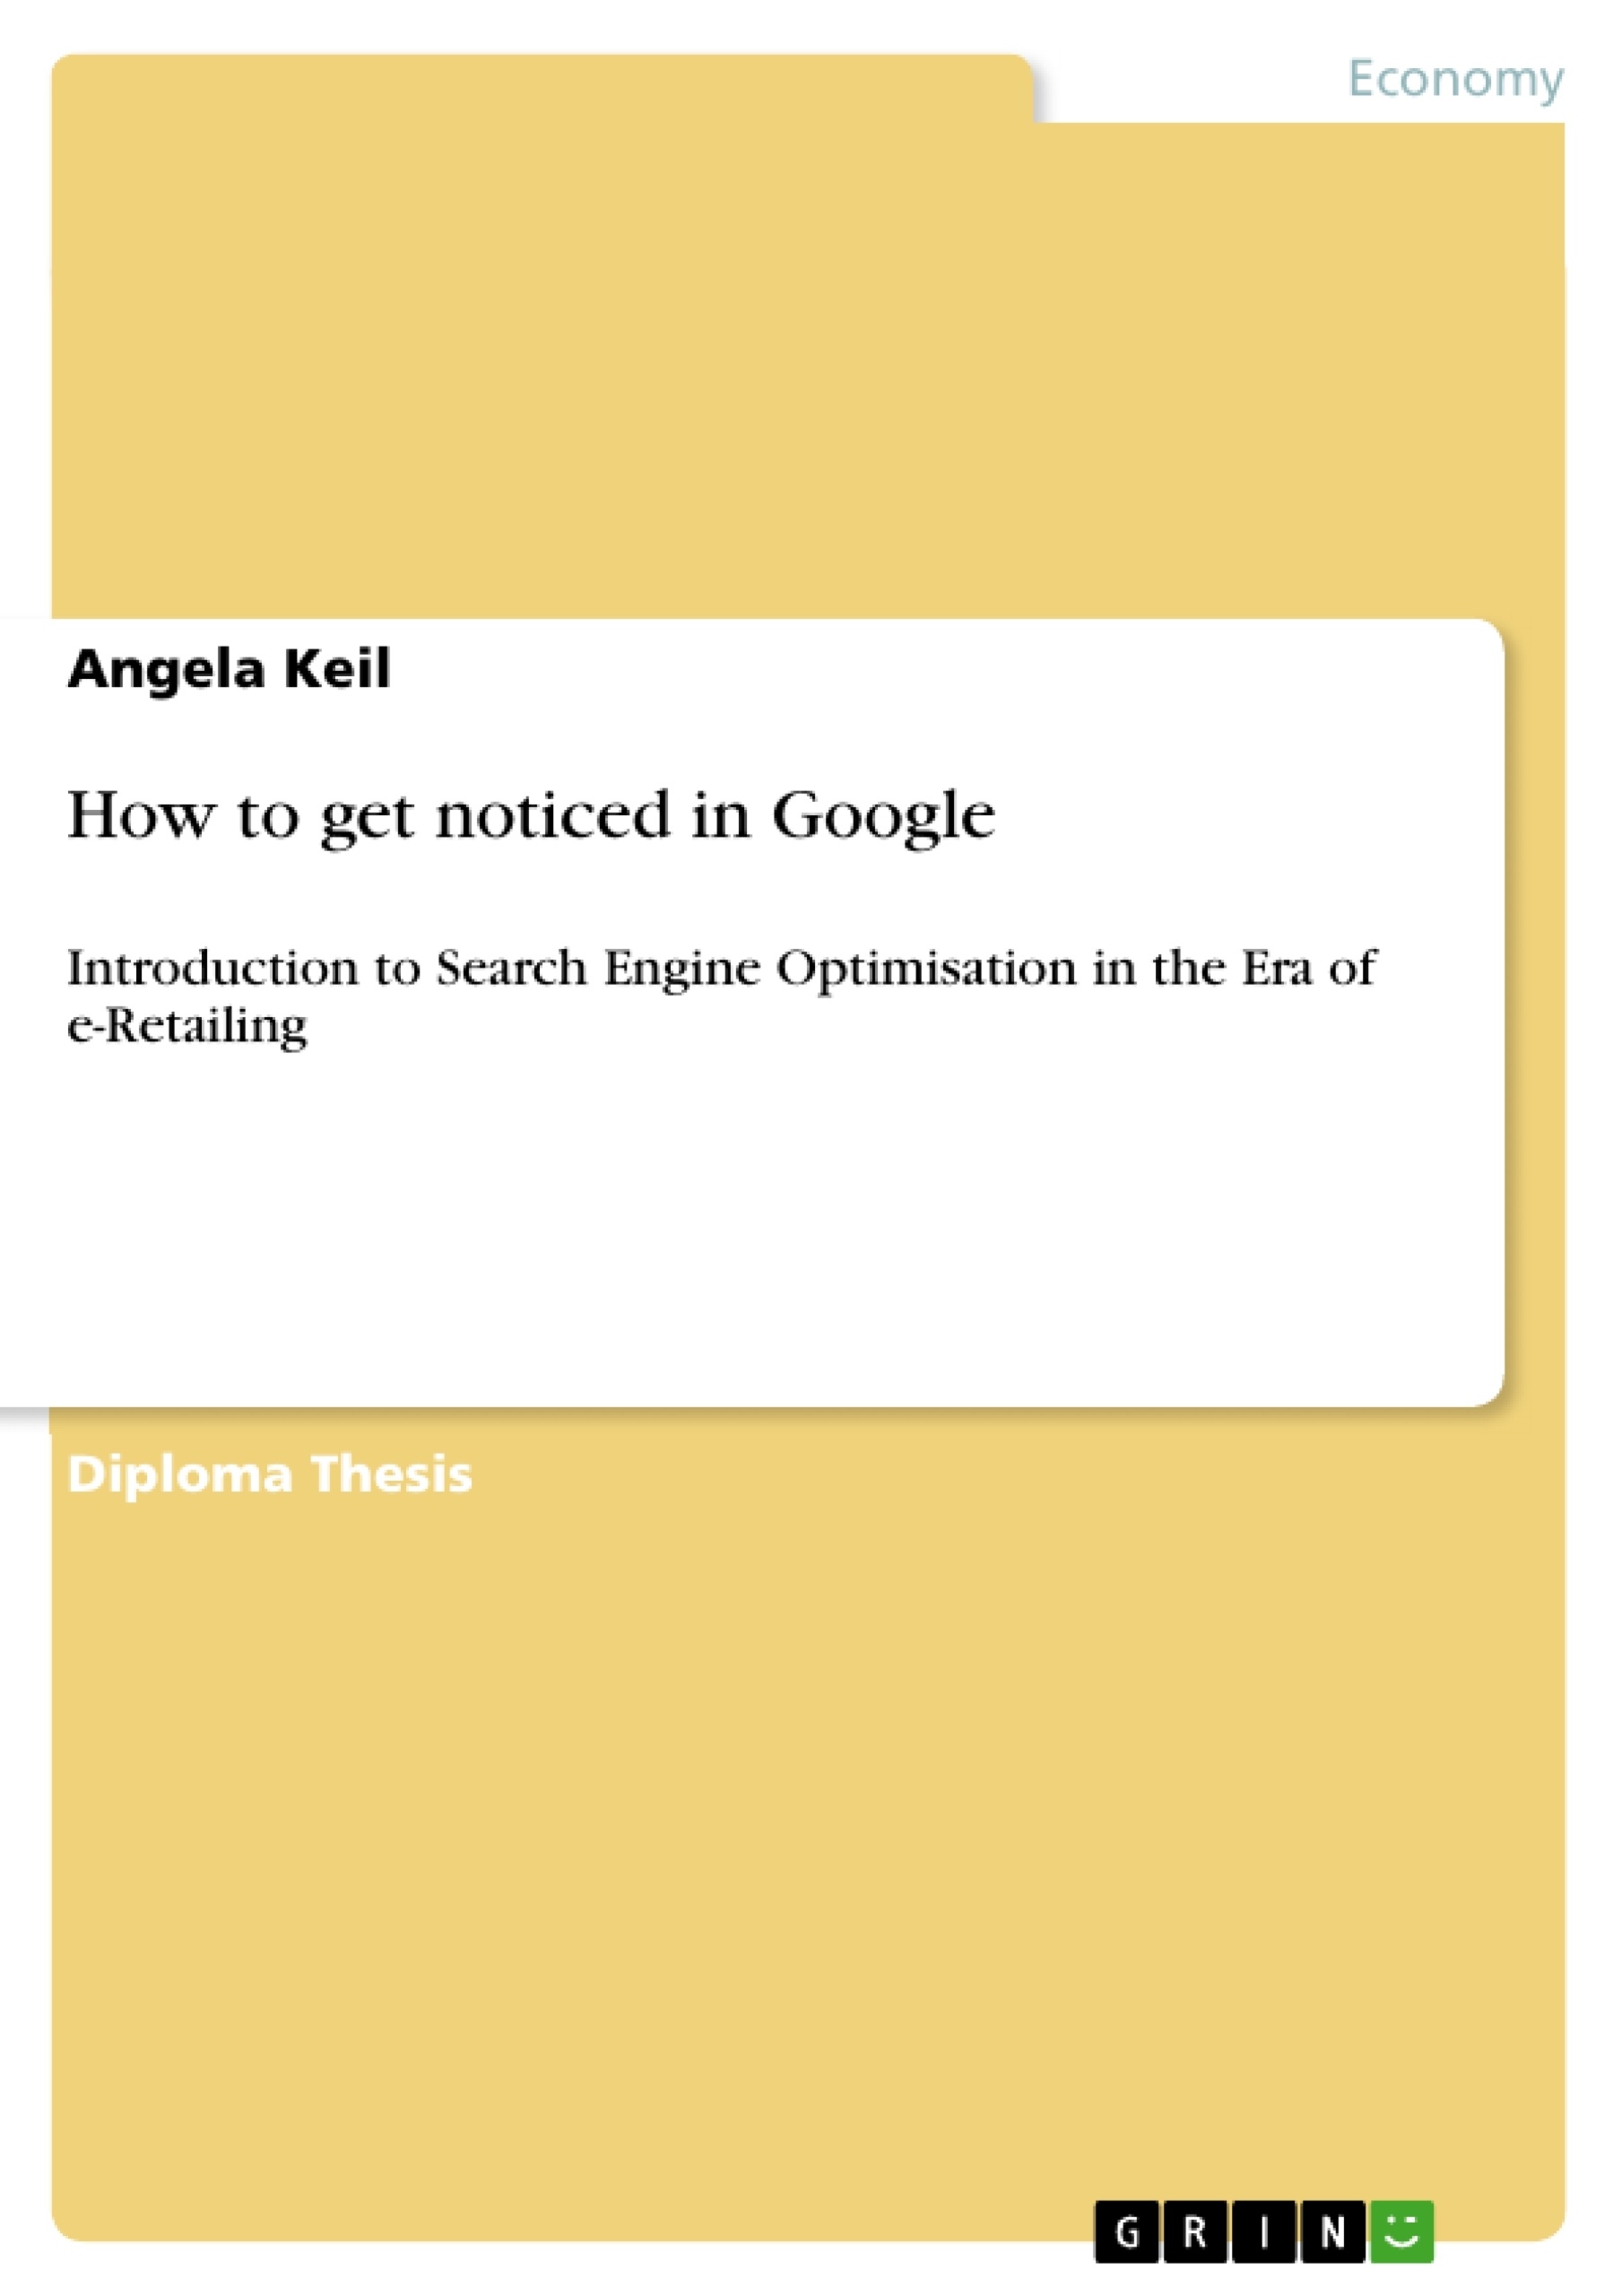 Title: How to get noticed in Google